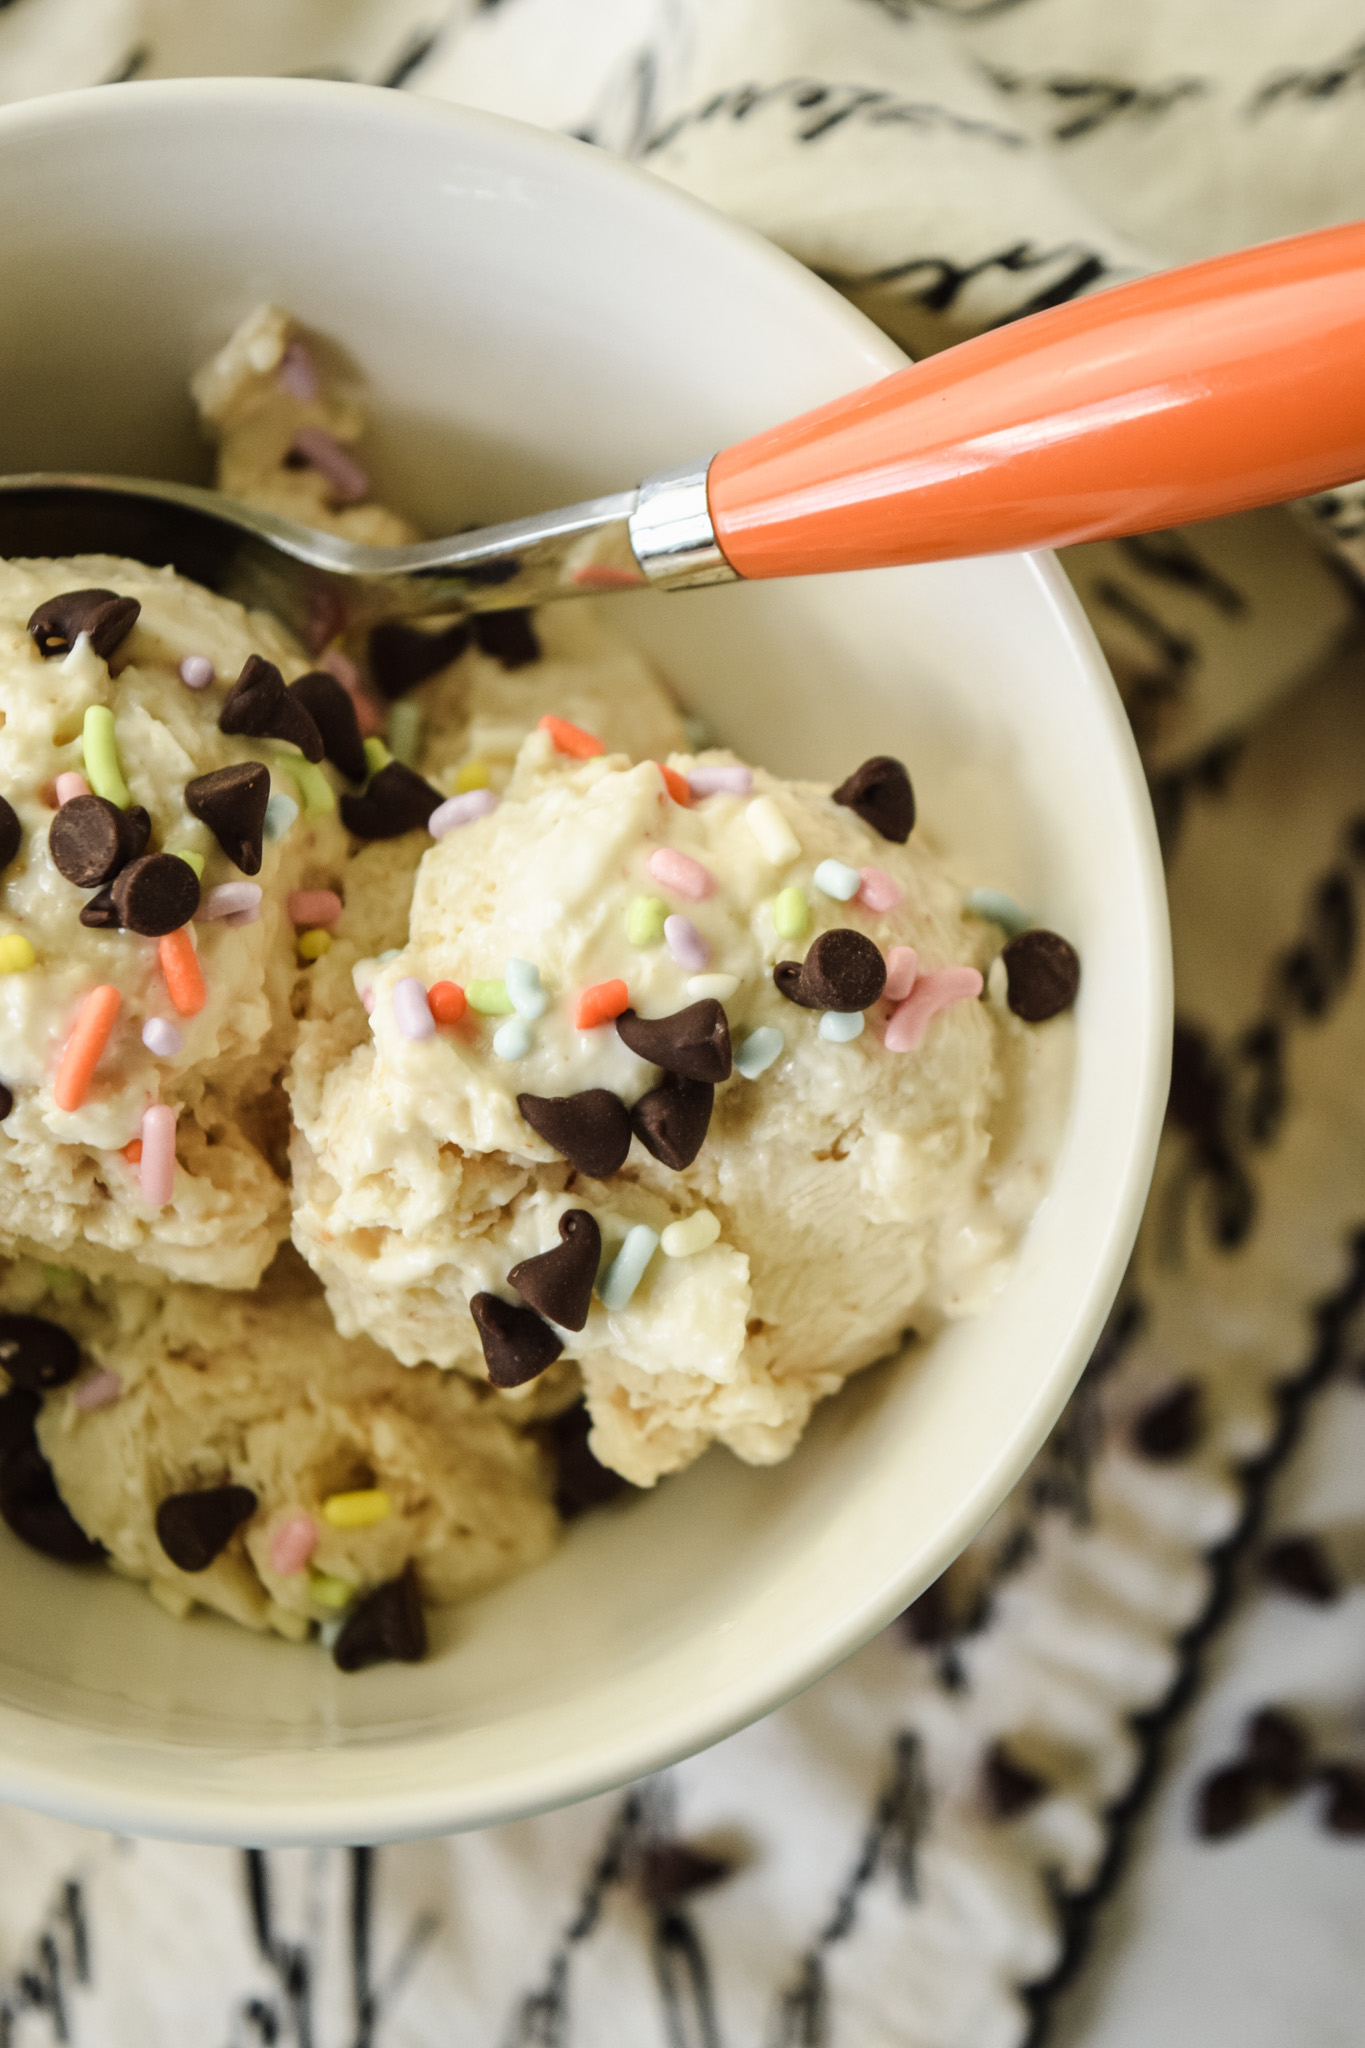 Viral Tiktok Cottage Cheese Ice Cream with Peanut Butter and Chocolate Chips